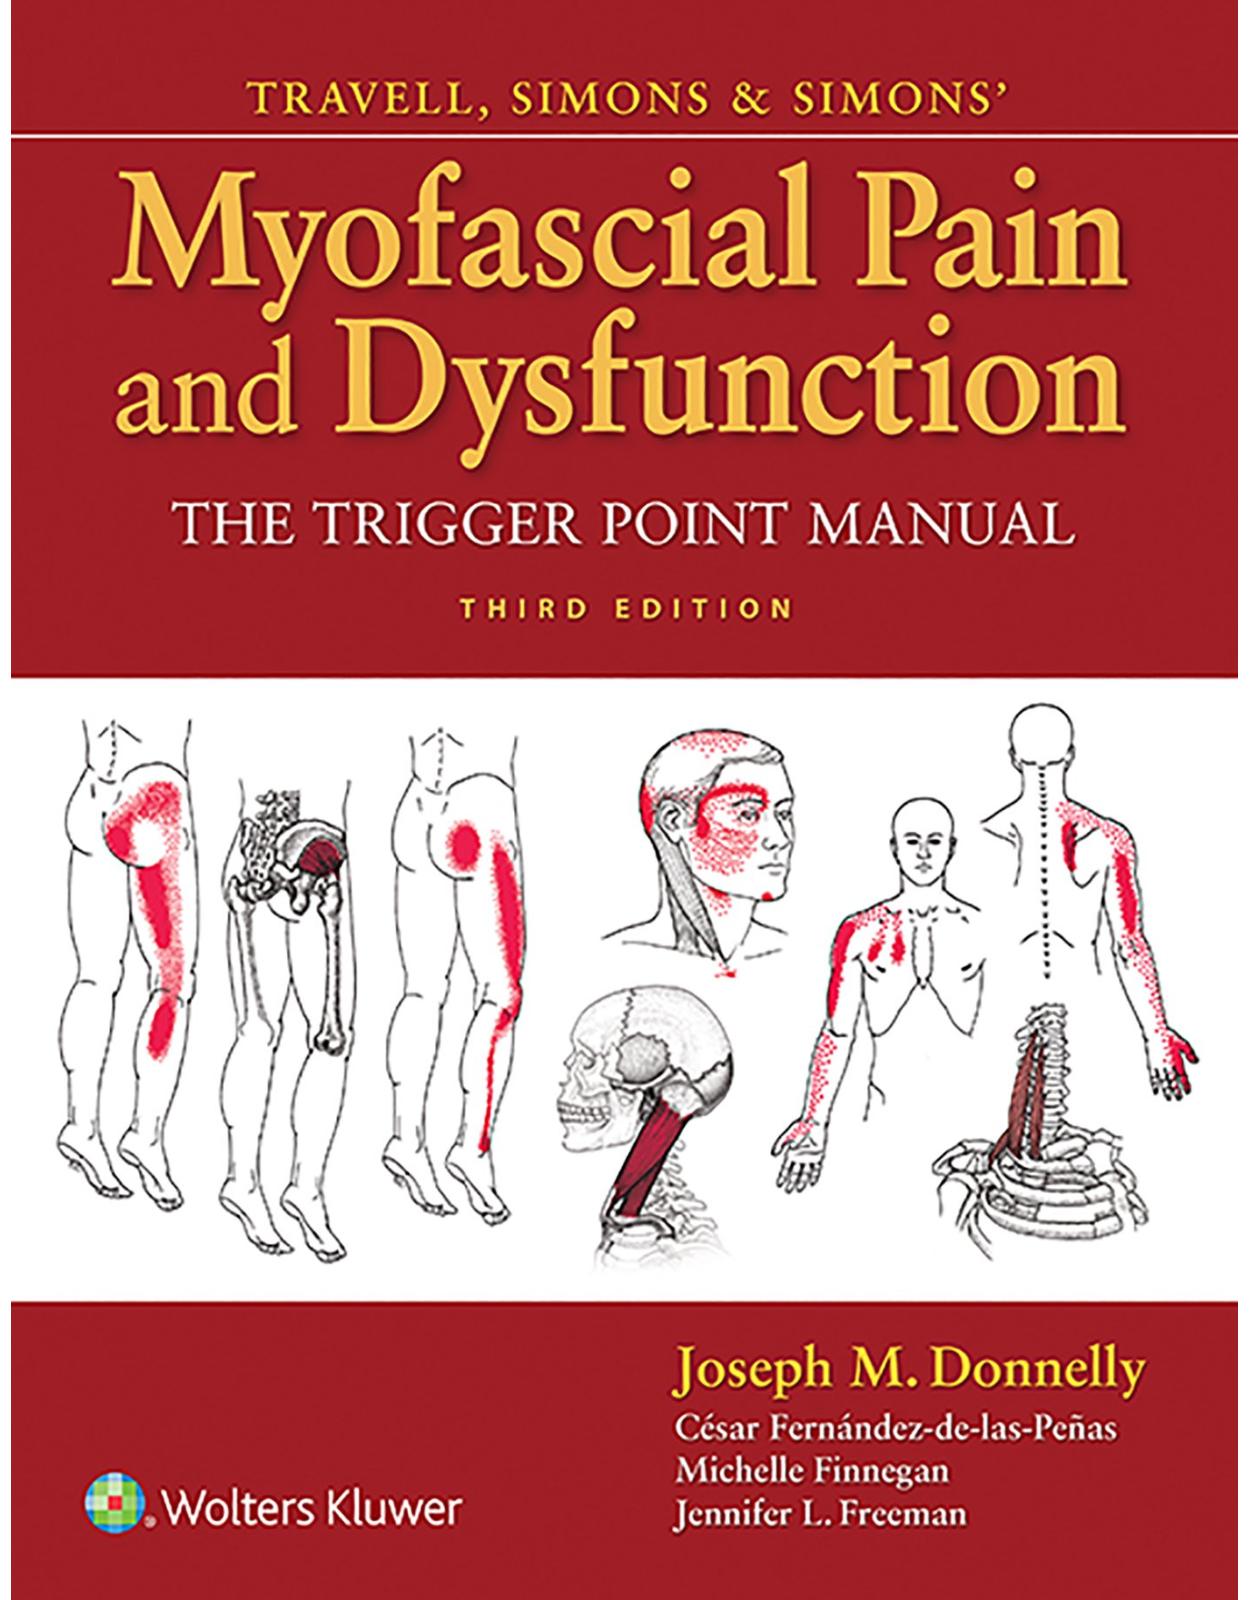 Travell and Simons' Myofascial Pain and Dysfunction: The Trigger Point Manual